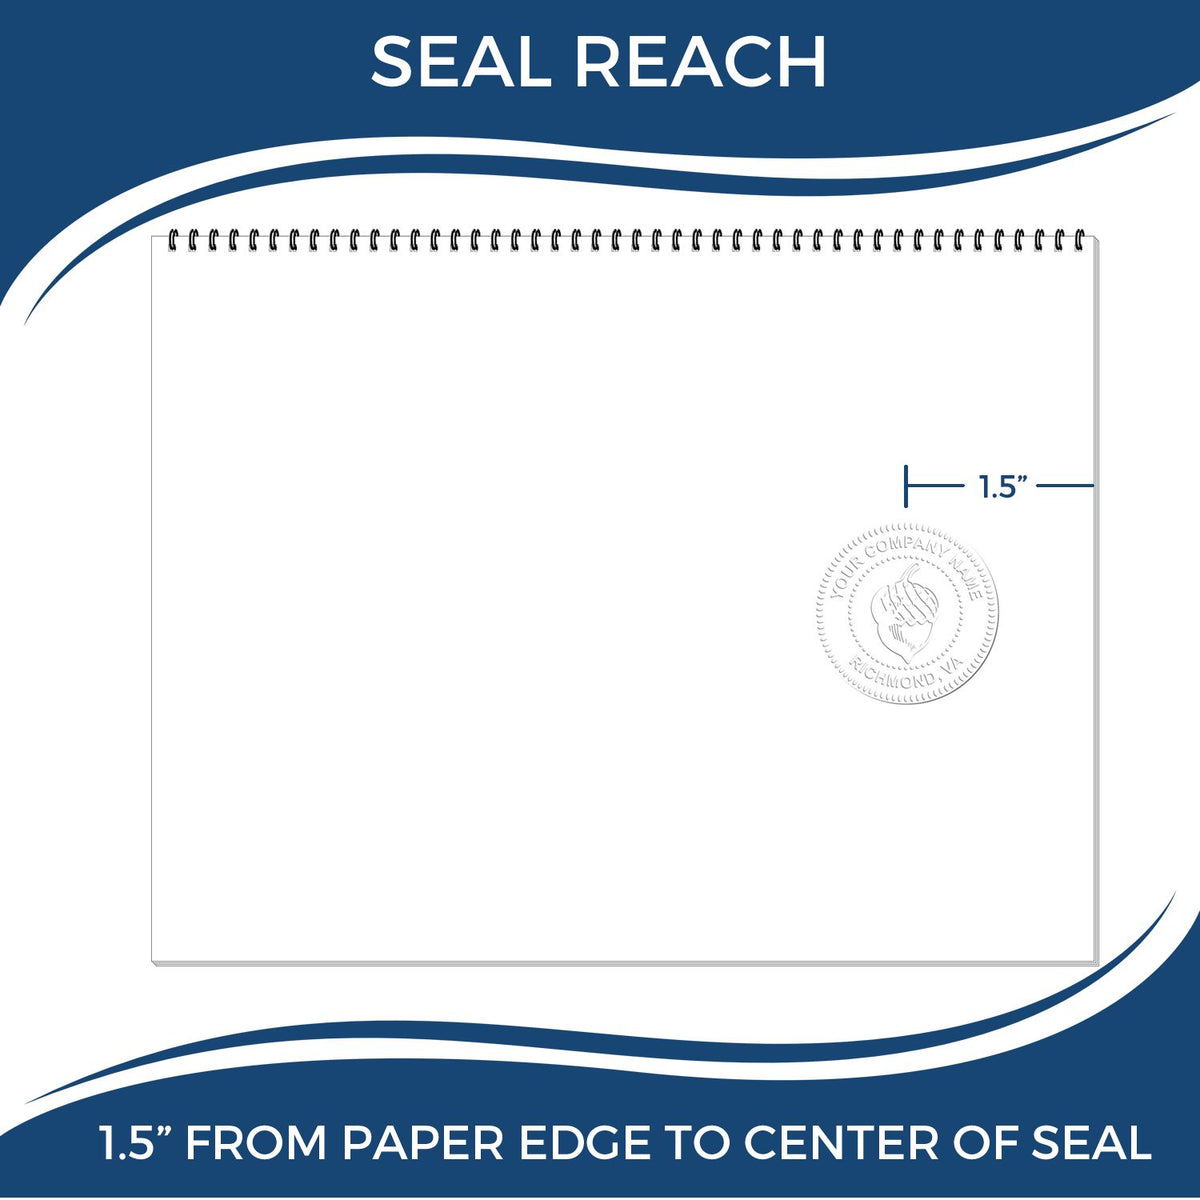 An infographic showing the seal reach which is represented by a ruler and a miniature seal image of the Gift Montana Land Surveyor Seal